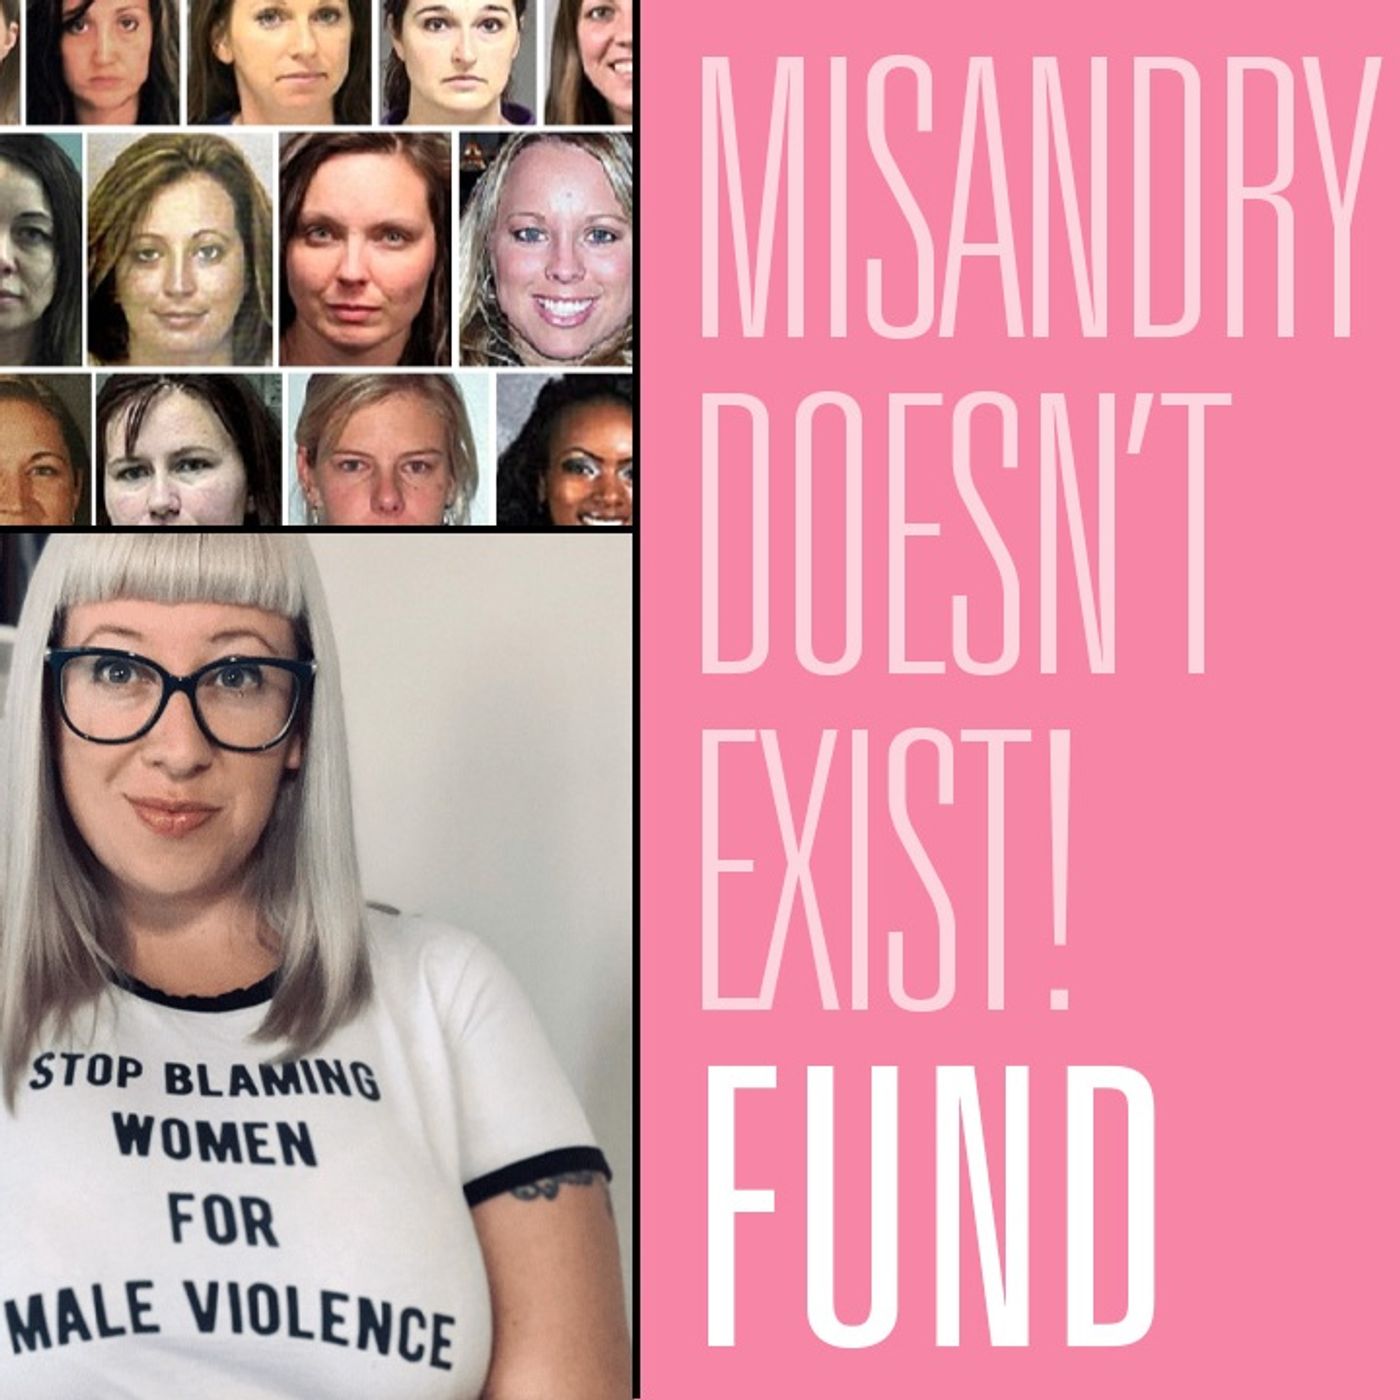 37 Questions to Prove Misandry Doesn't Exist Anywhere In the World | Fundzerker 139